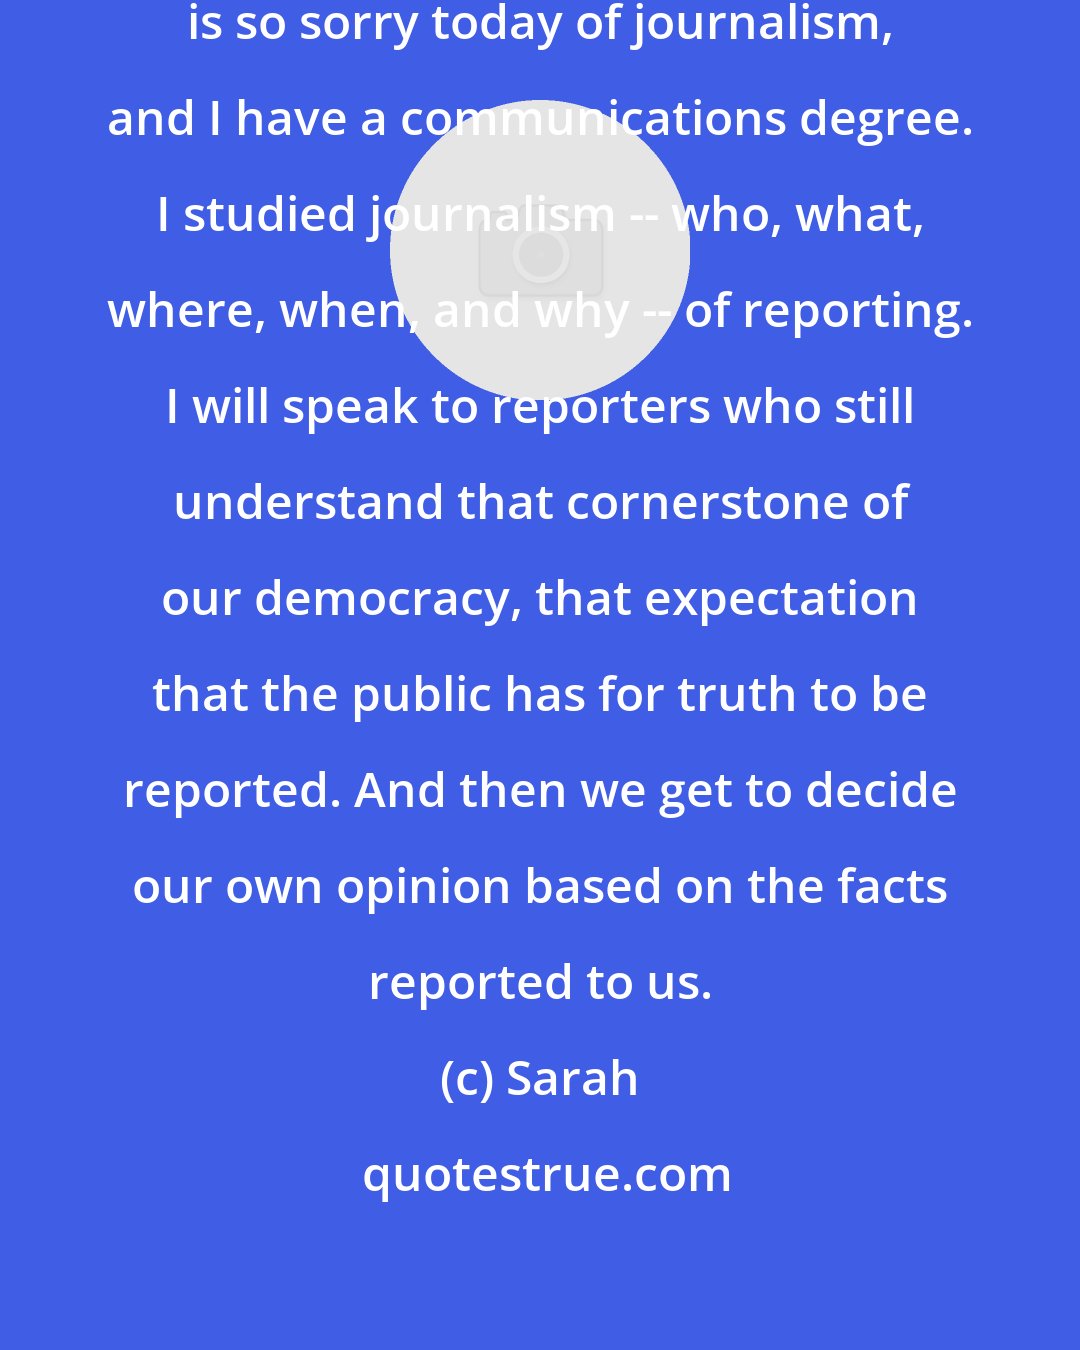 Sarah: I want to help clean up the state that is so sorry today of journalism, and I have a communications degree. I studied journalism -- who, what, where, when, and why -- of reporting. I will speak to reporters who still understand that cornerstone of our democracy, that expectation that the public has for truth to be reported. And then we get to decide our own opinion based on the facts reported to us.